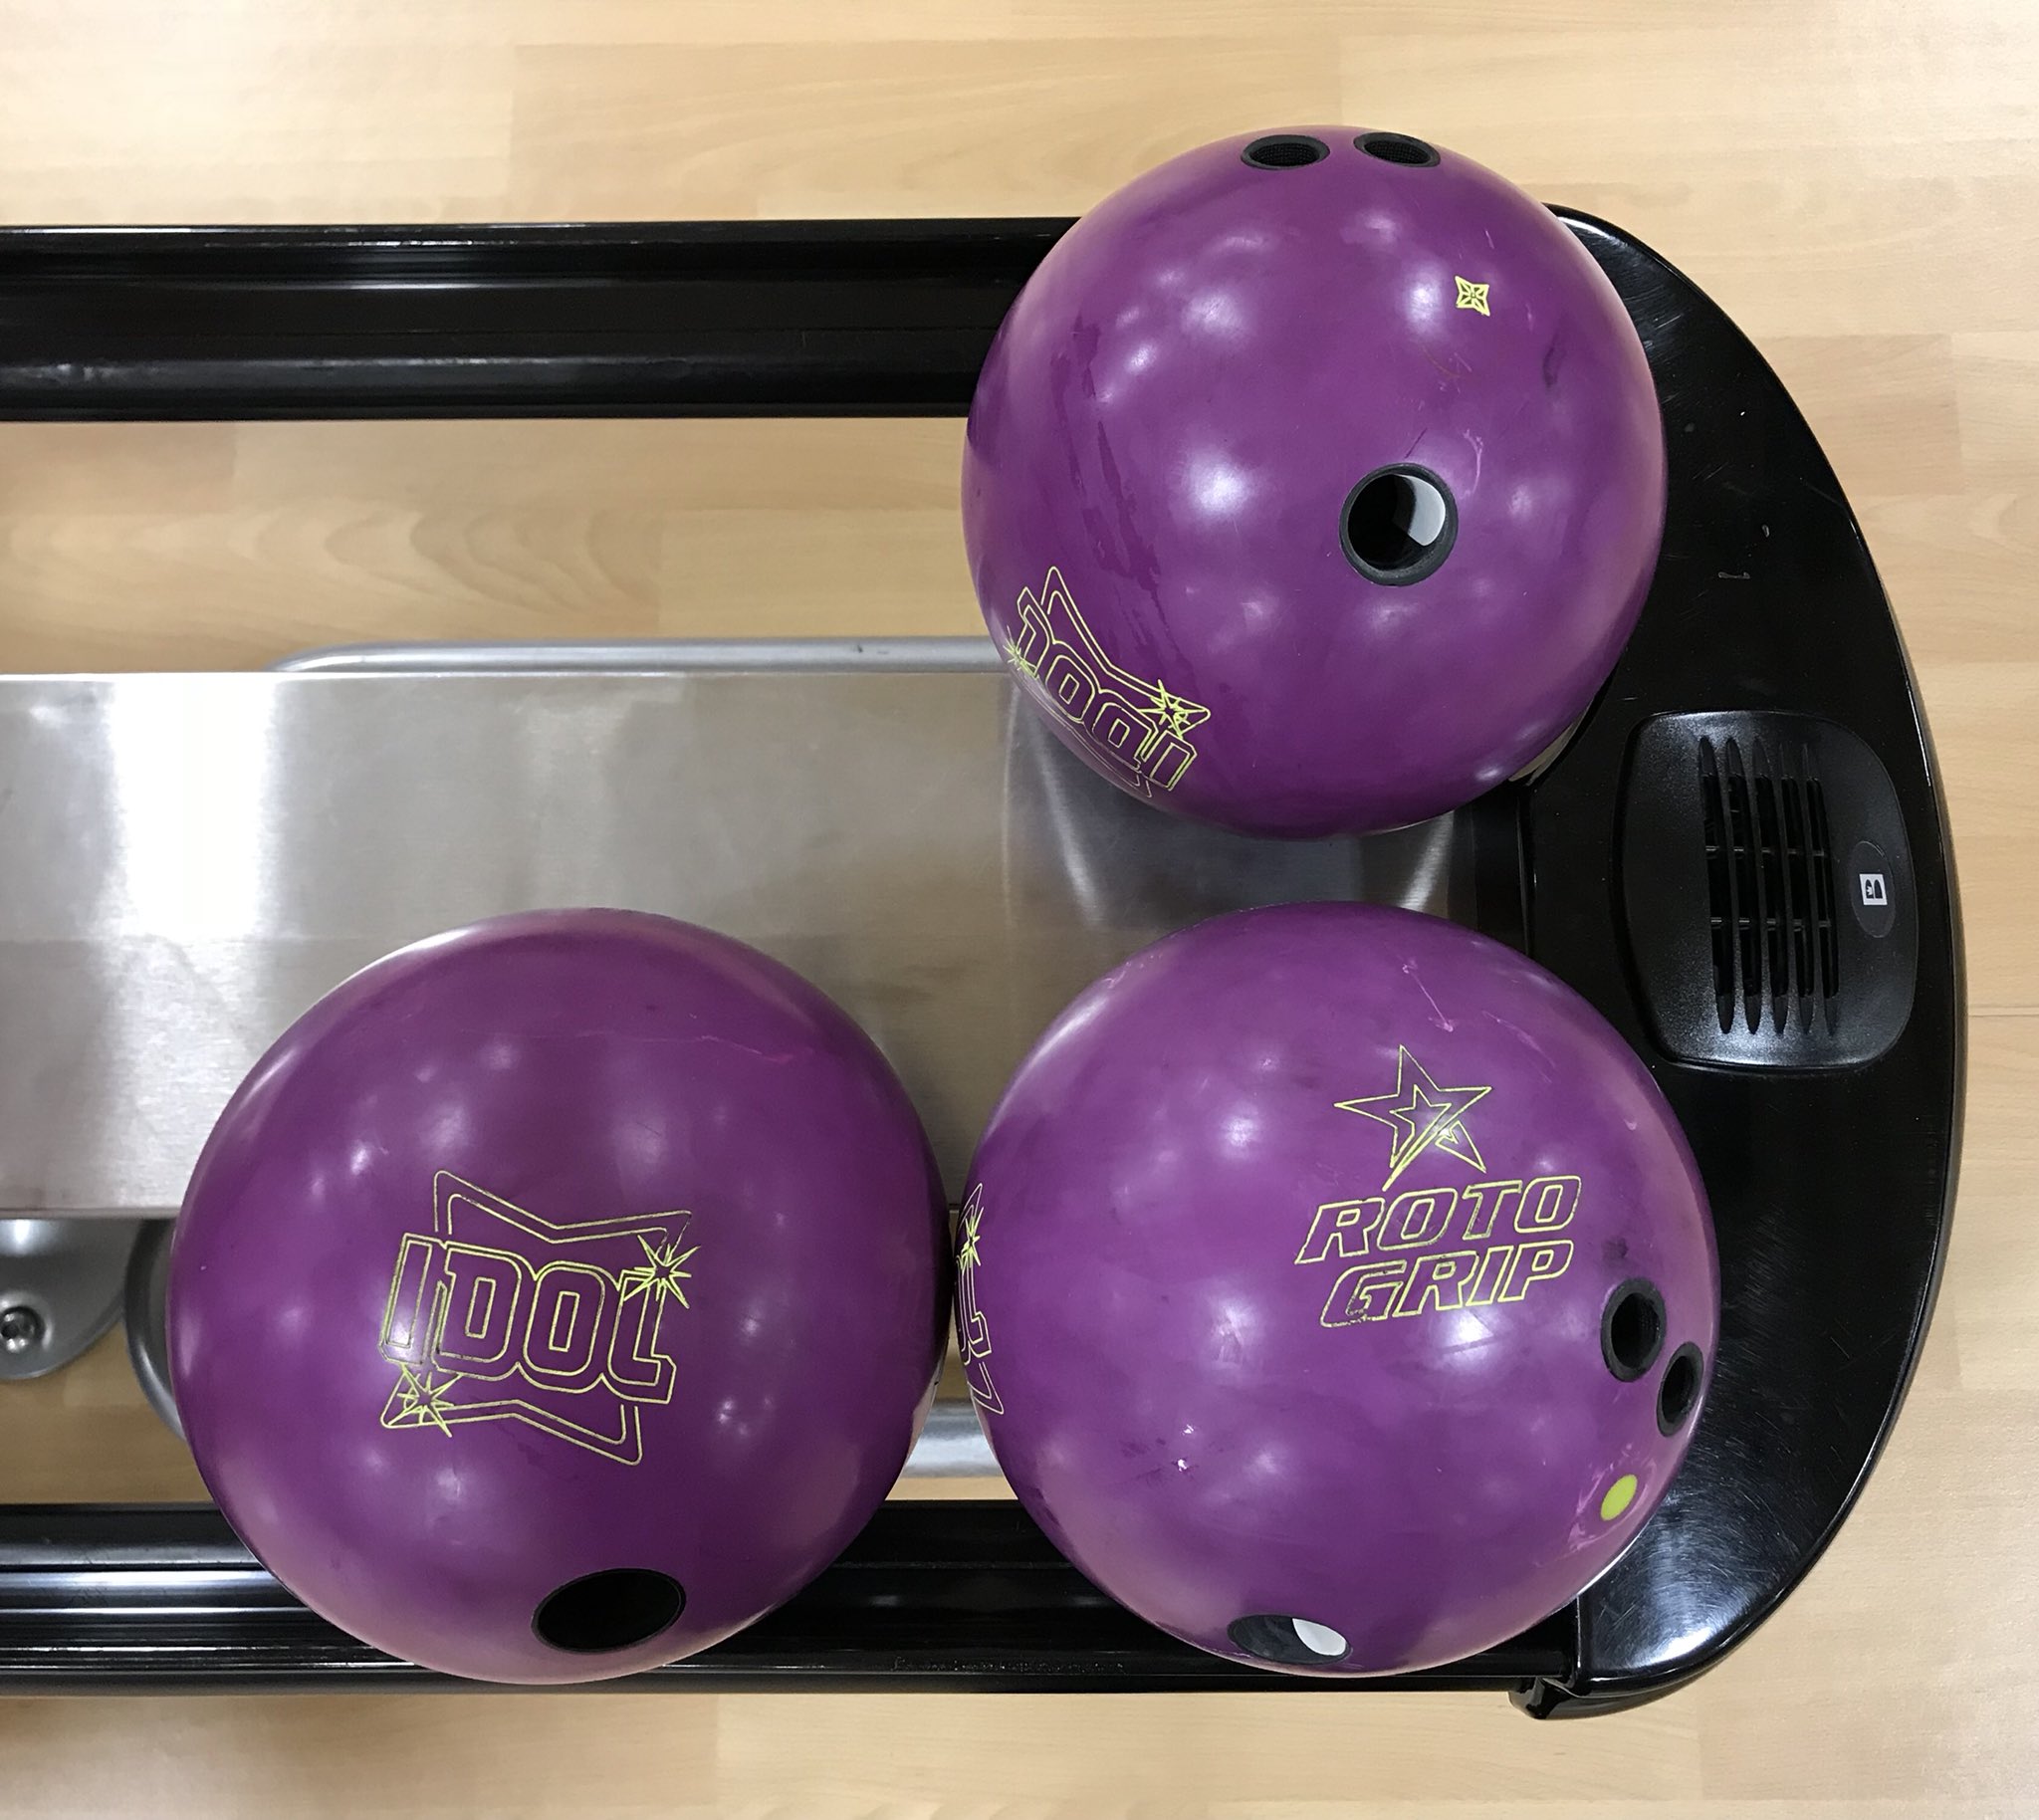 Roto Grip Bowling on Twitter: "I guess you can say the Idol is the ball choice today with PWBA Ladies in Las Vegas. Did you get one yet? #SquadRG #OwnIt